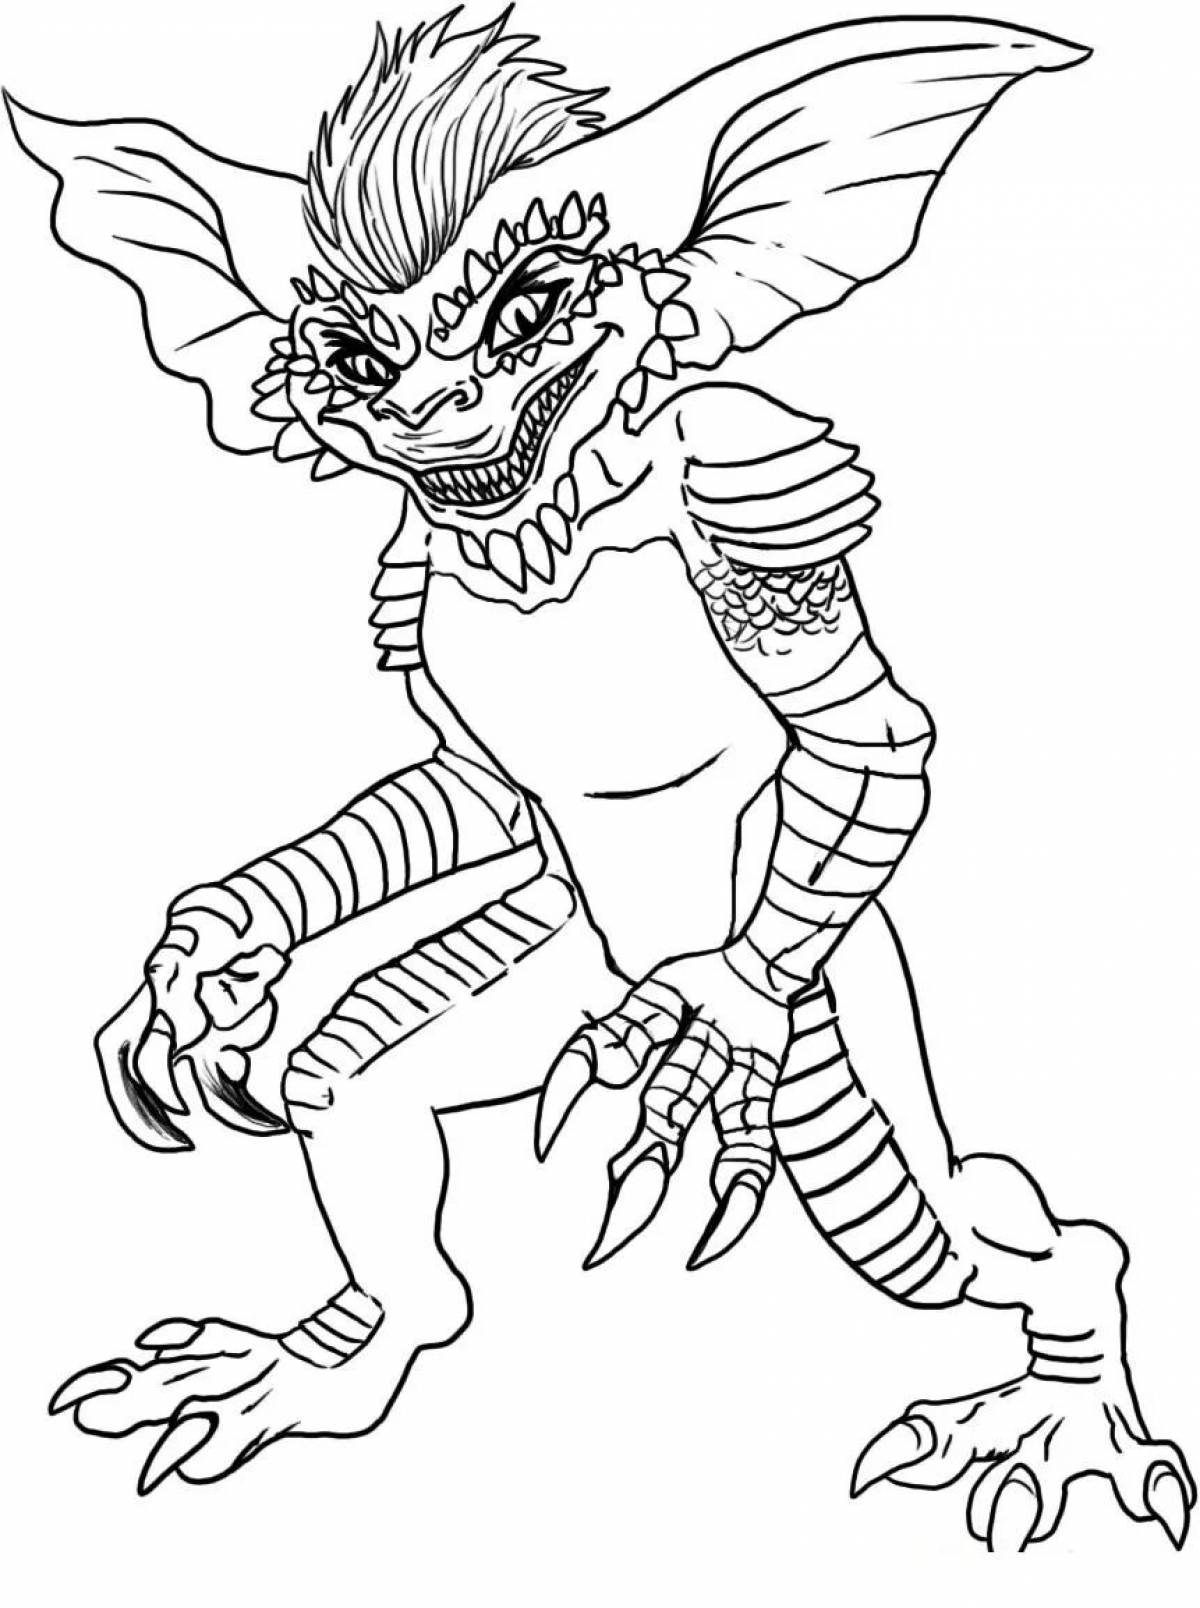 Delightful gremlin coloring pages